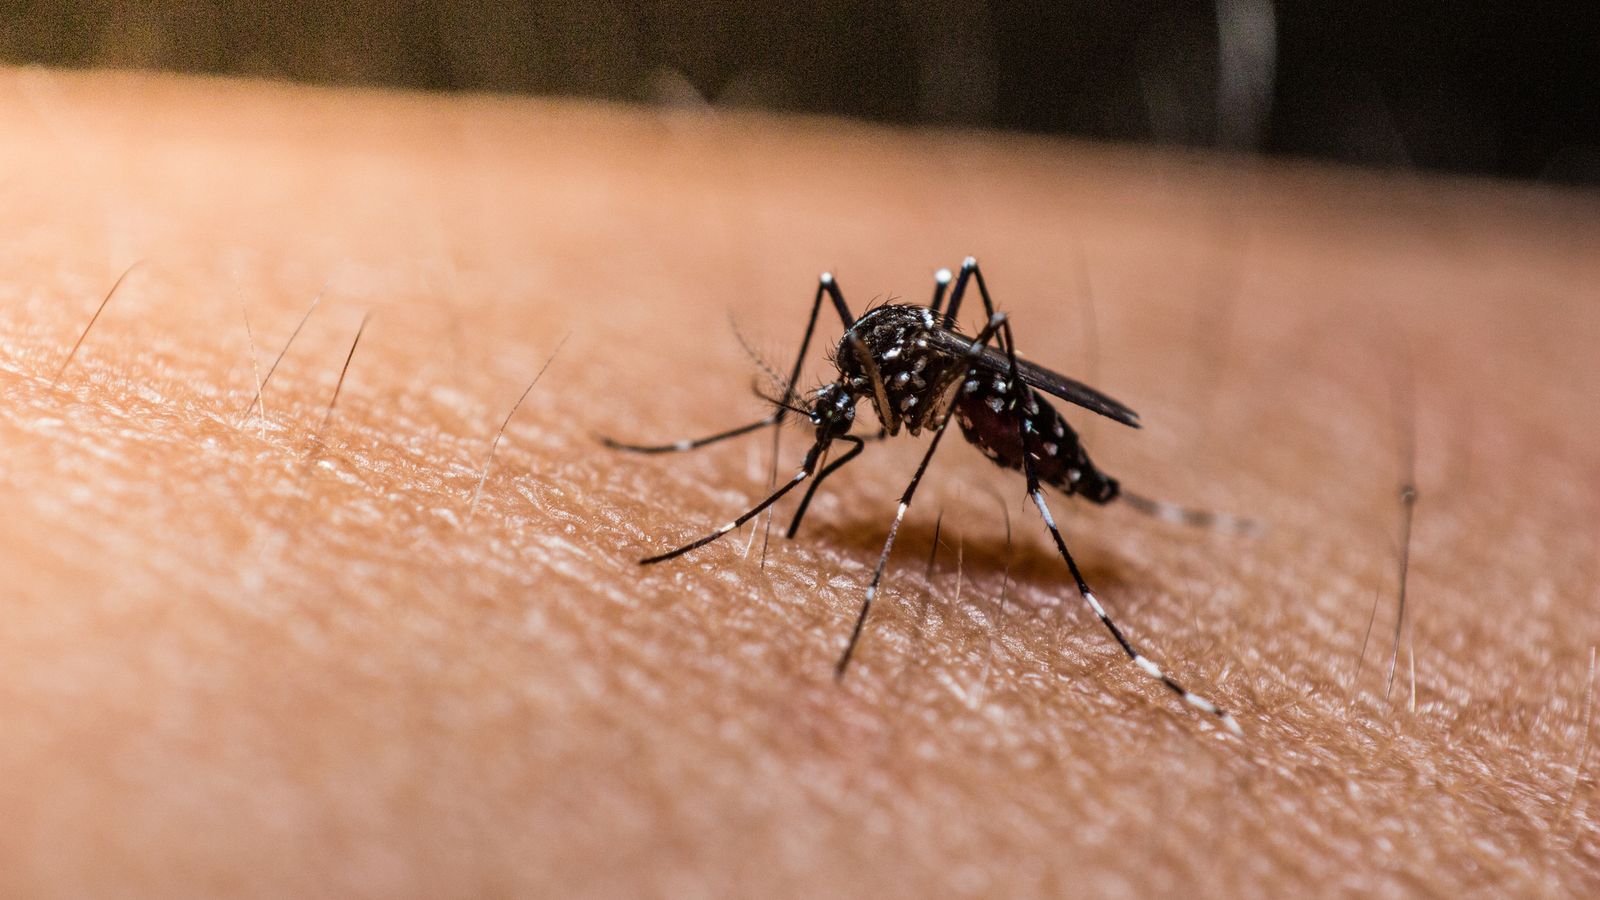 Cheap malaria vaccine developed with help of Oxford scientists approved for global rollout